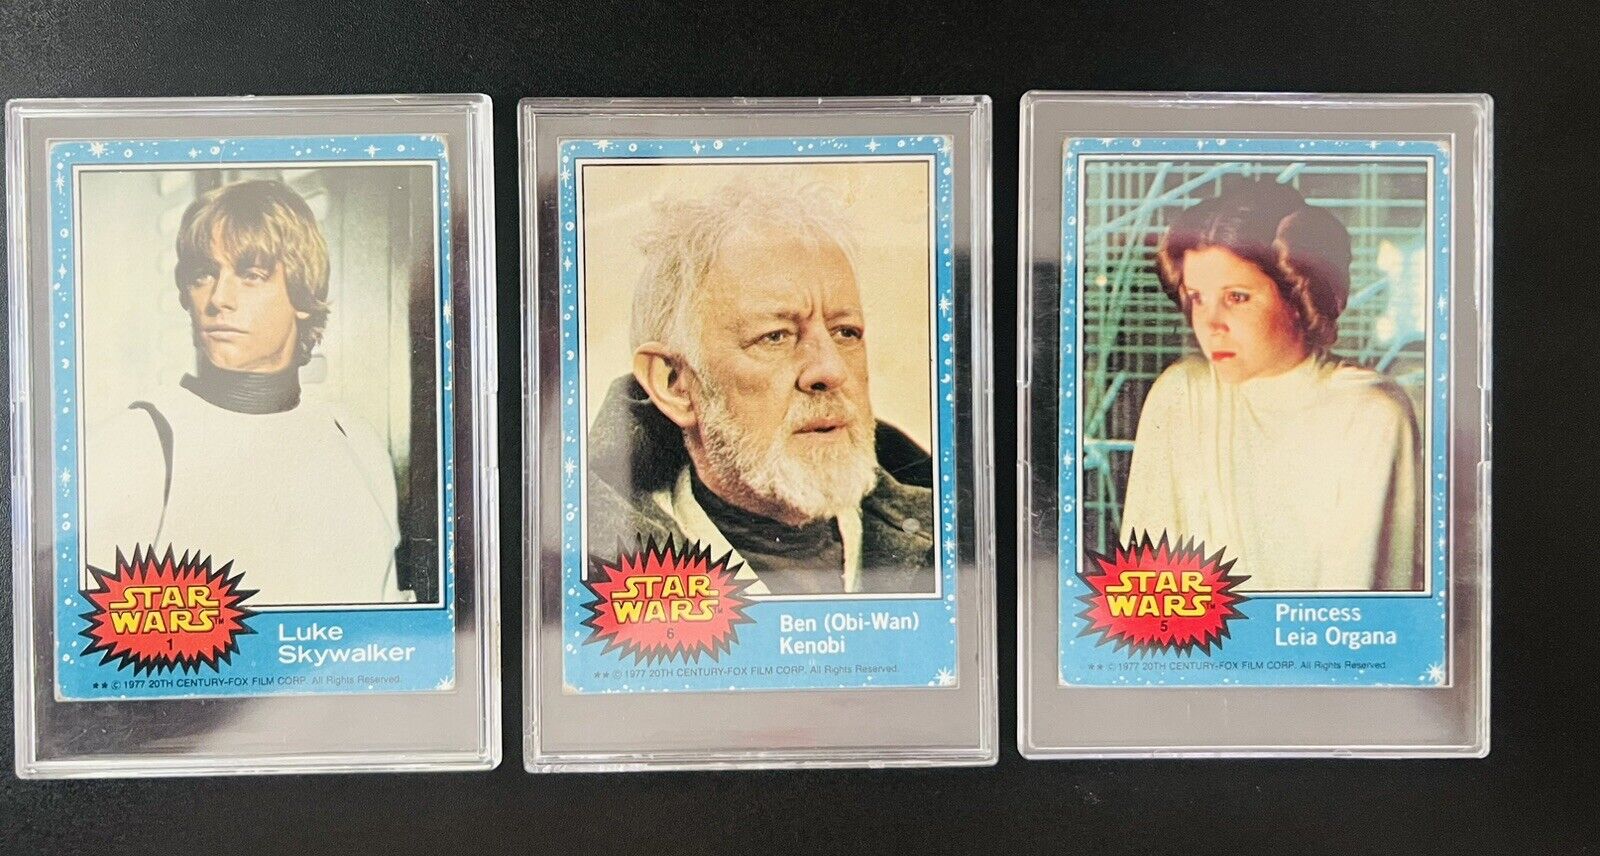 1977 STAR WARS - Topps Series 1st Edition BLUE 3 Card Lot